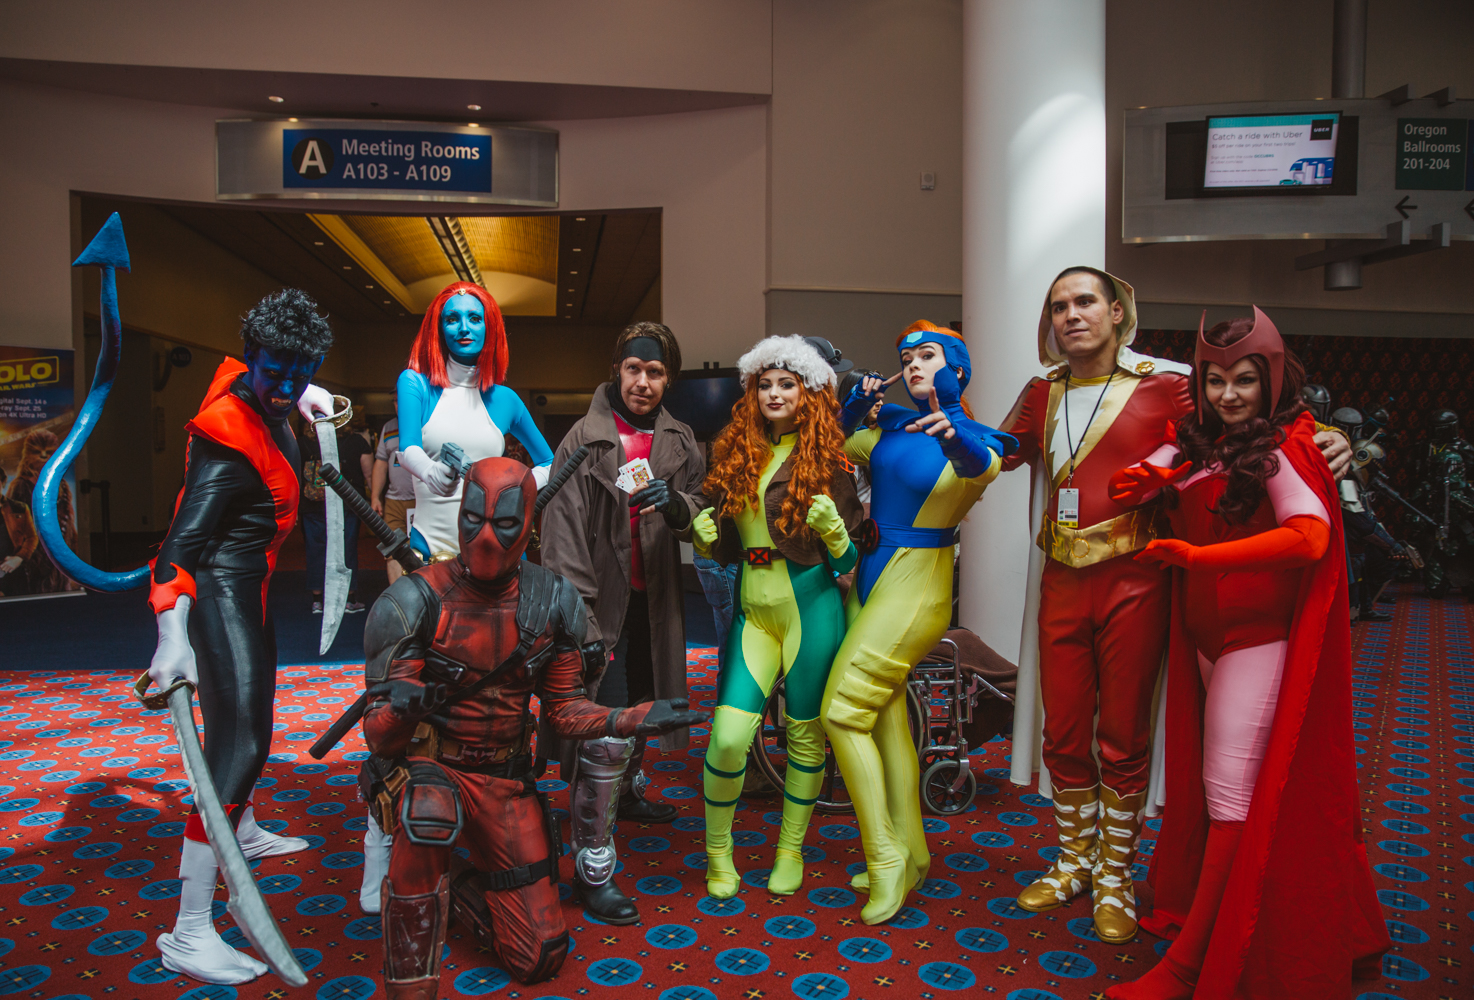 Photos Day 2 of Portland's Comic Con highlights the craziest costumes